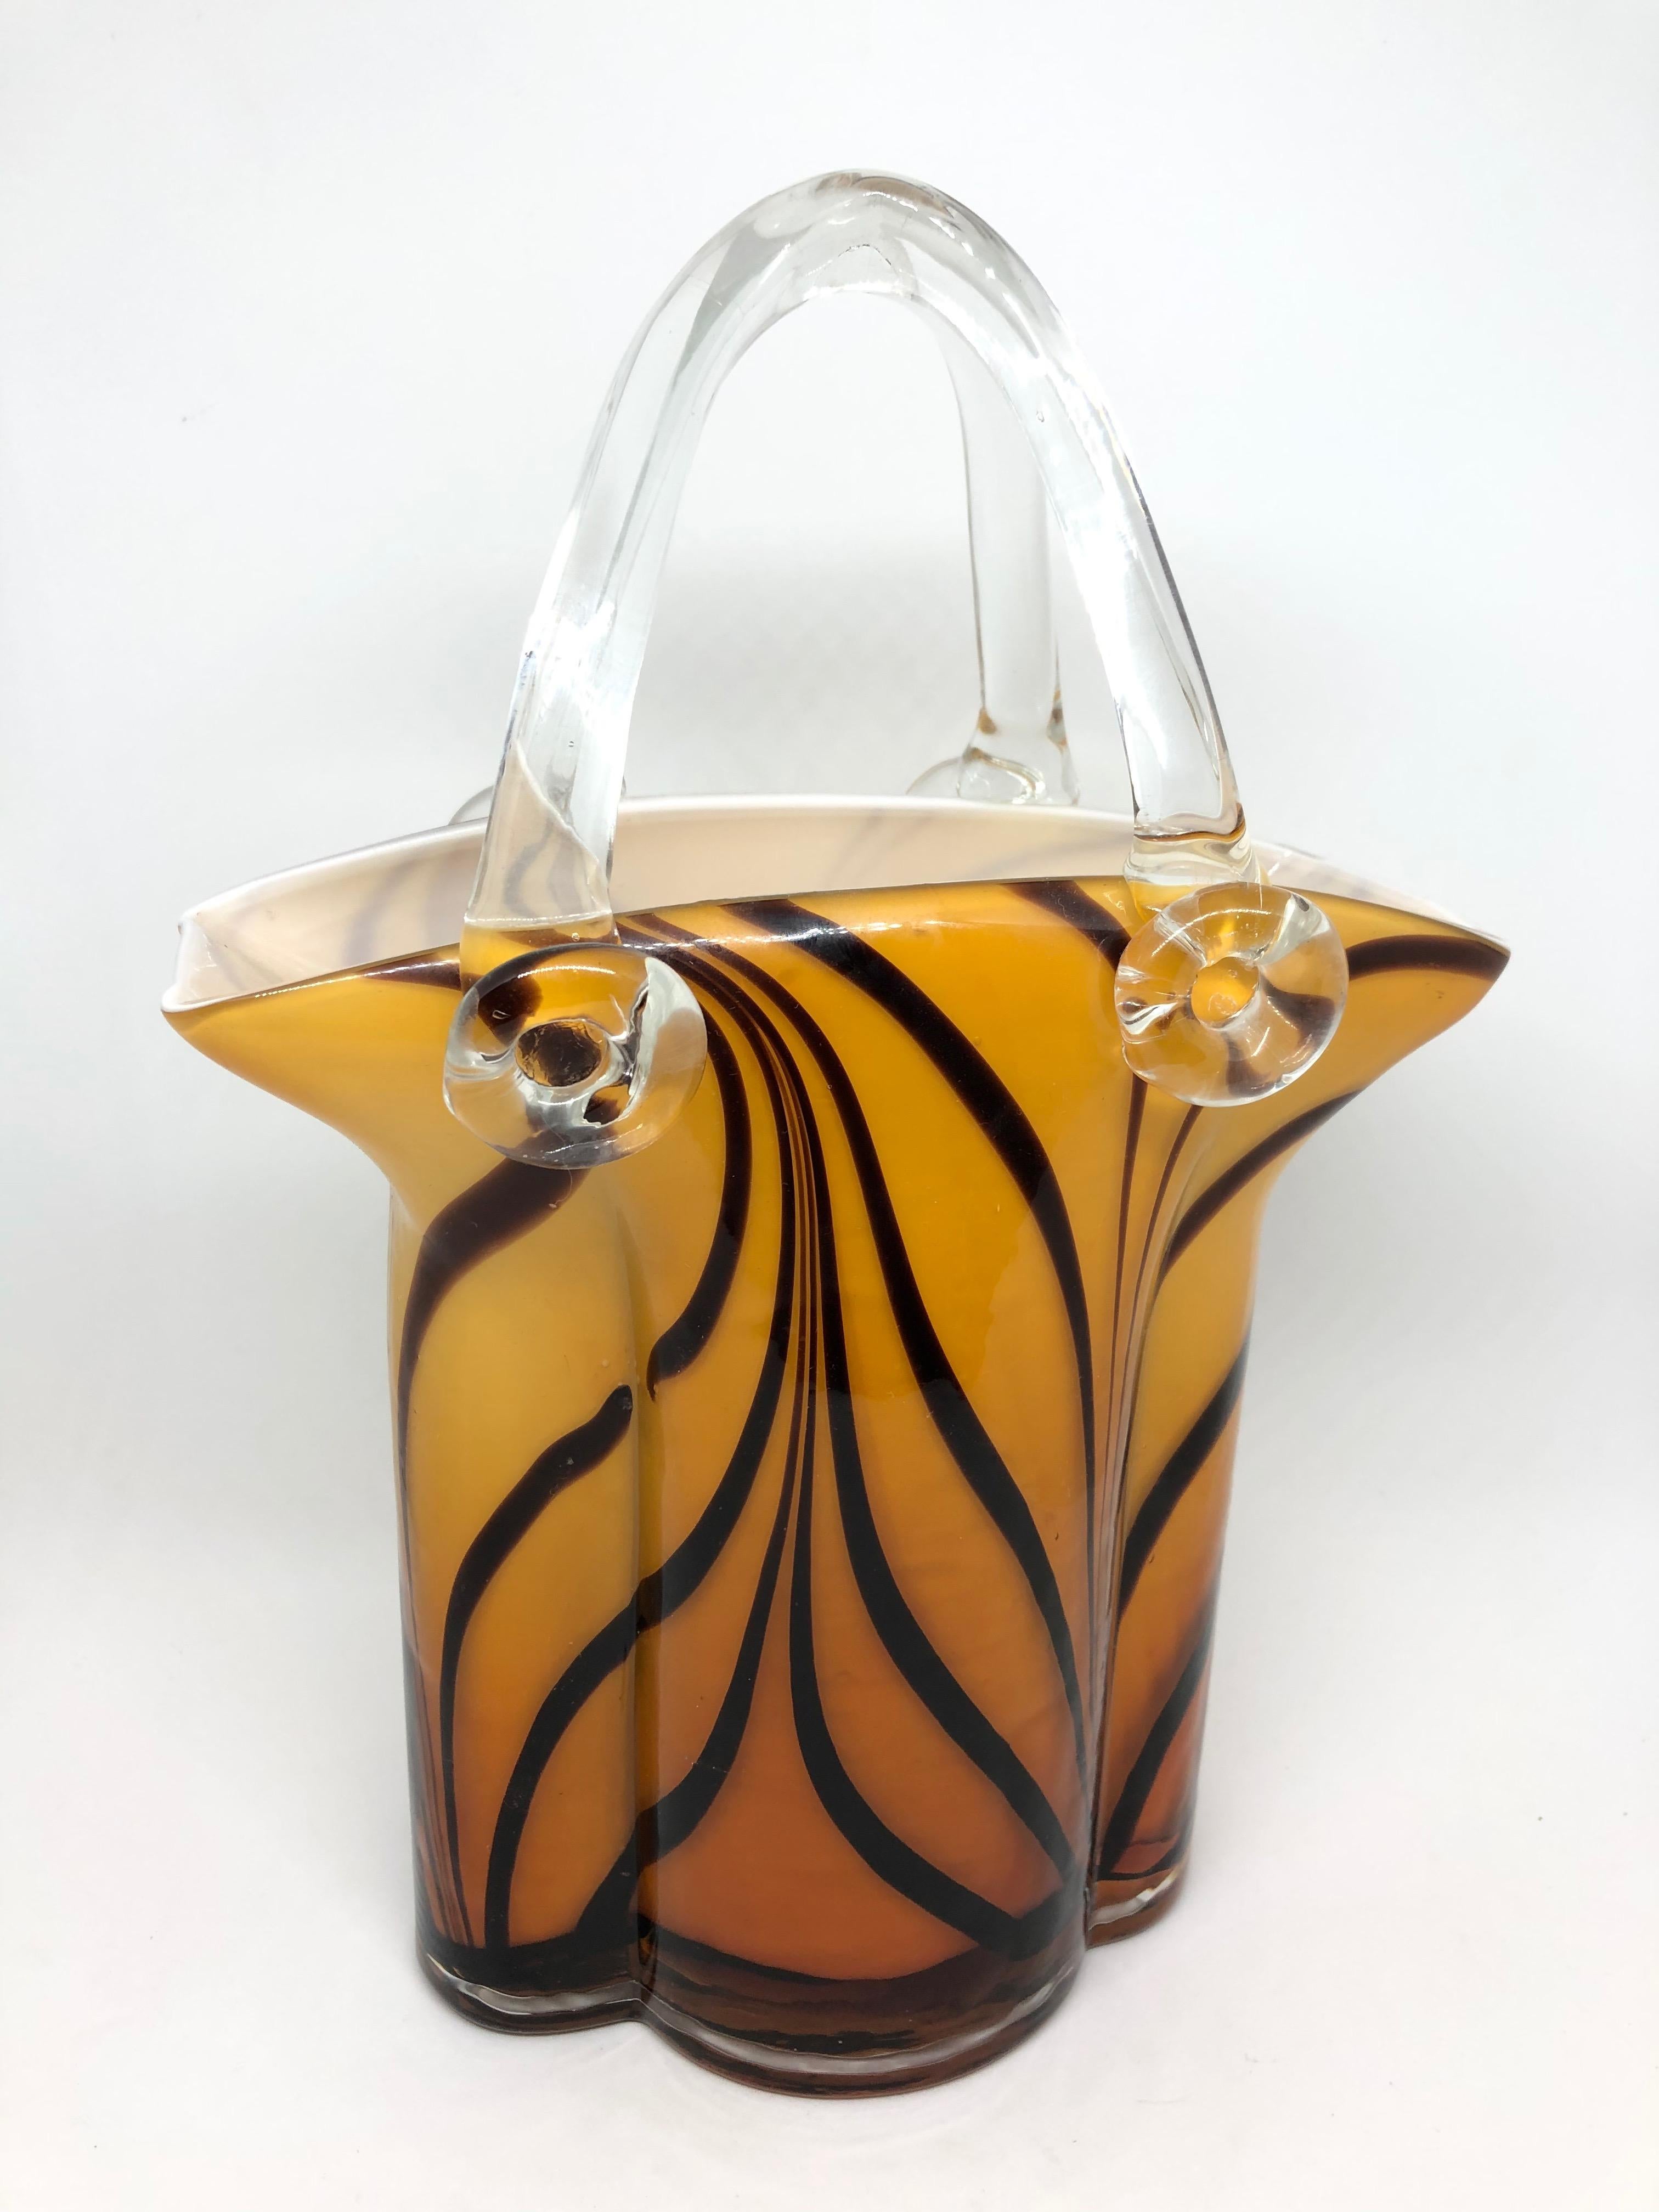 An amazing Venetian Murano glass Mid-Century Modern Sommerso Vase made in Italy, circa 1960s. This is a heavy glass item, white colored inside, outside brown and amber glass. It is in very good condition with no chips, cracks, or flea bites.